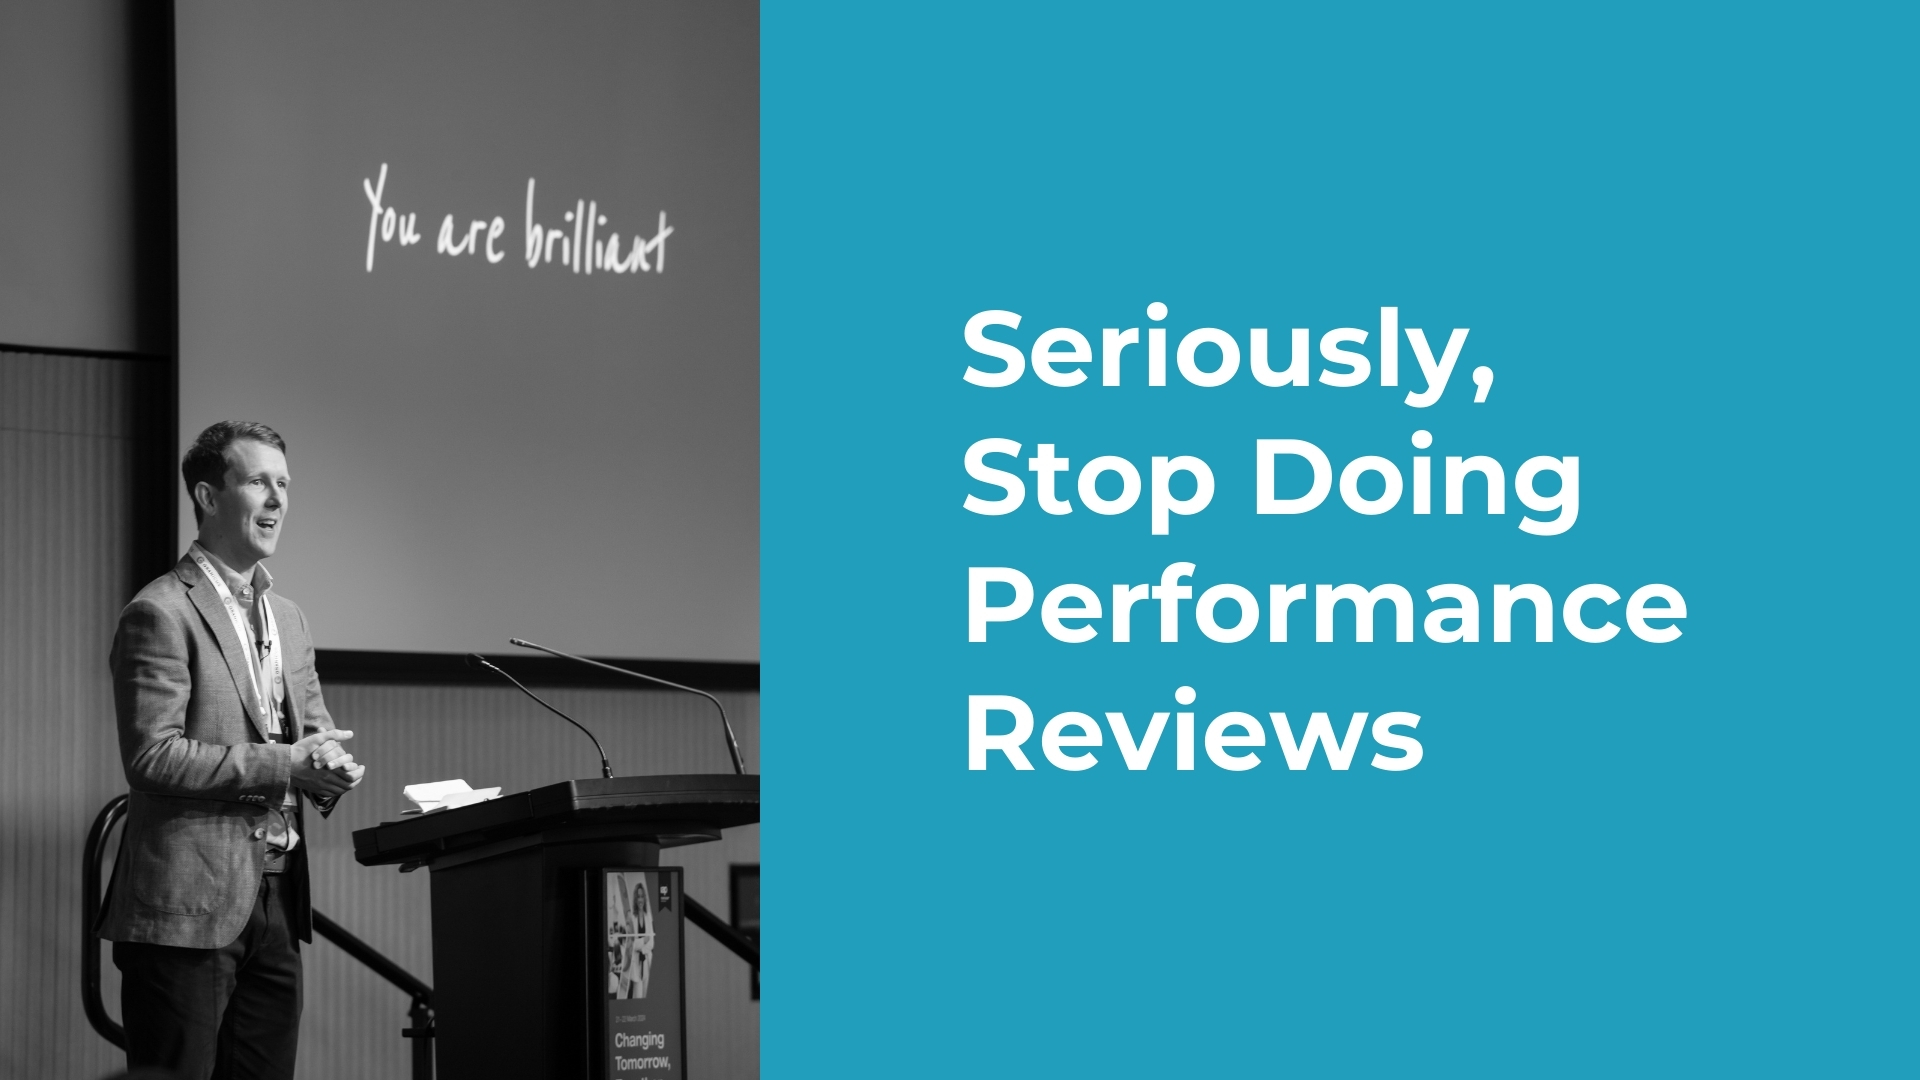 🫠 Seriously, stop doing performance reviews